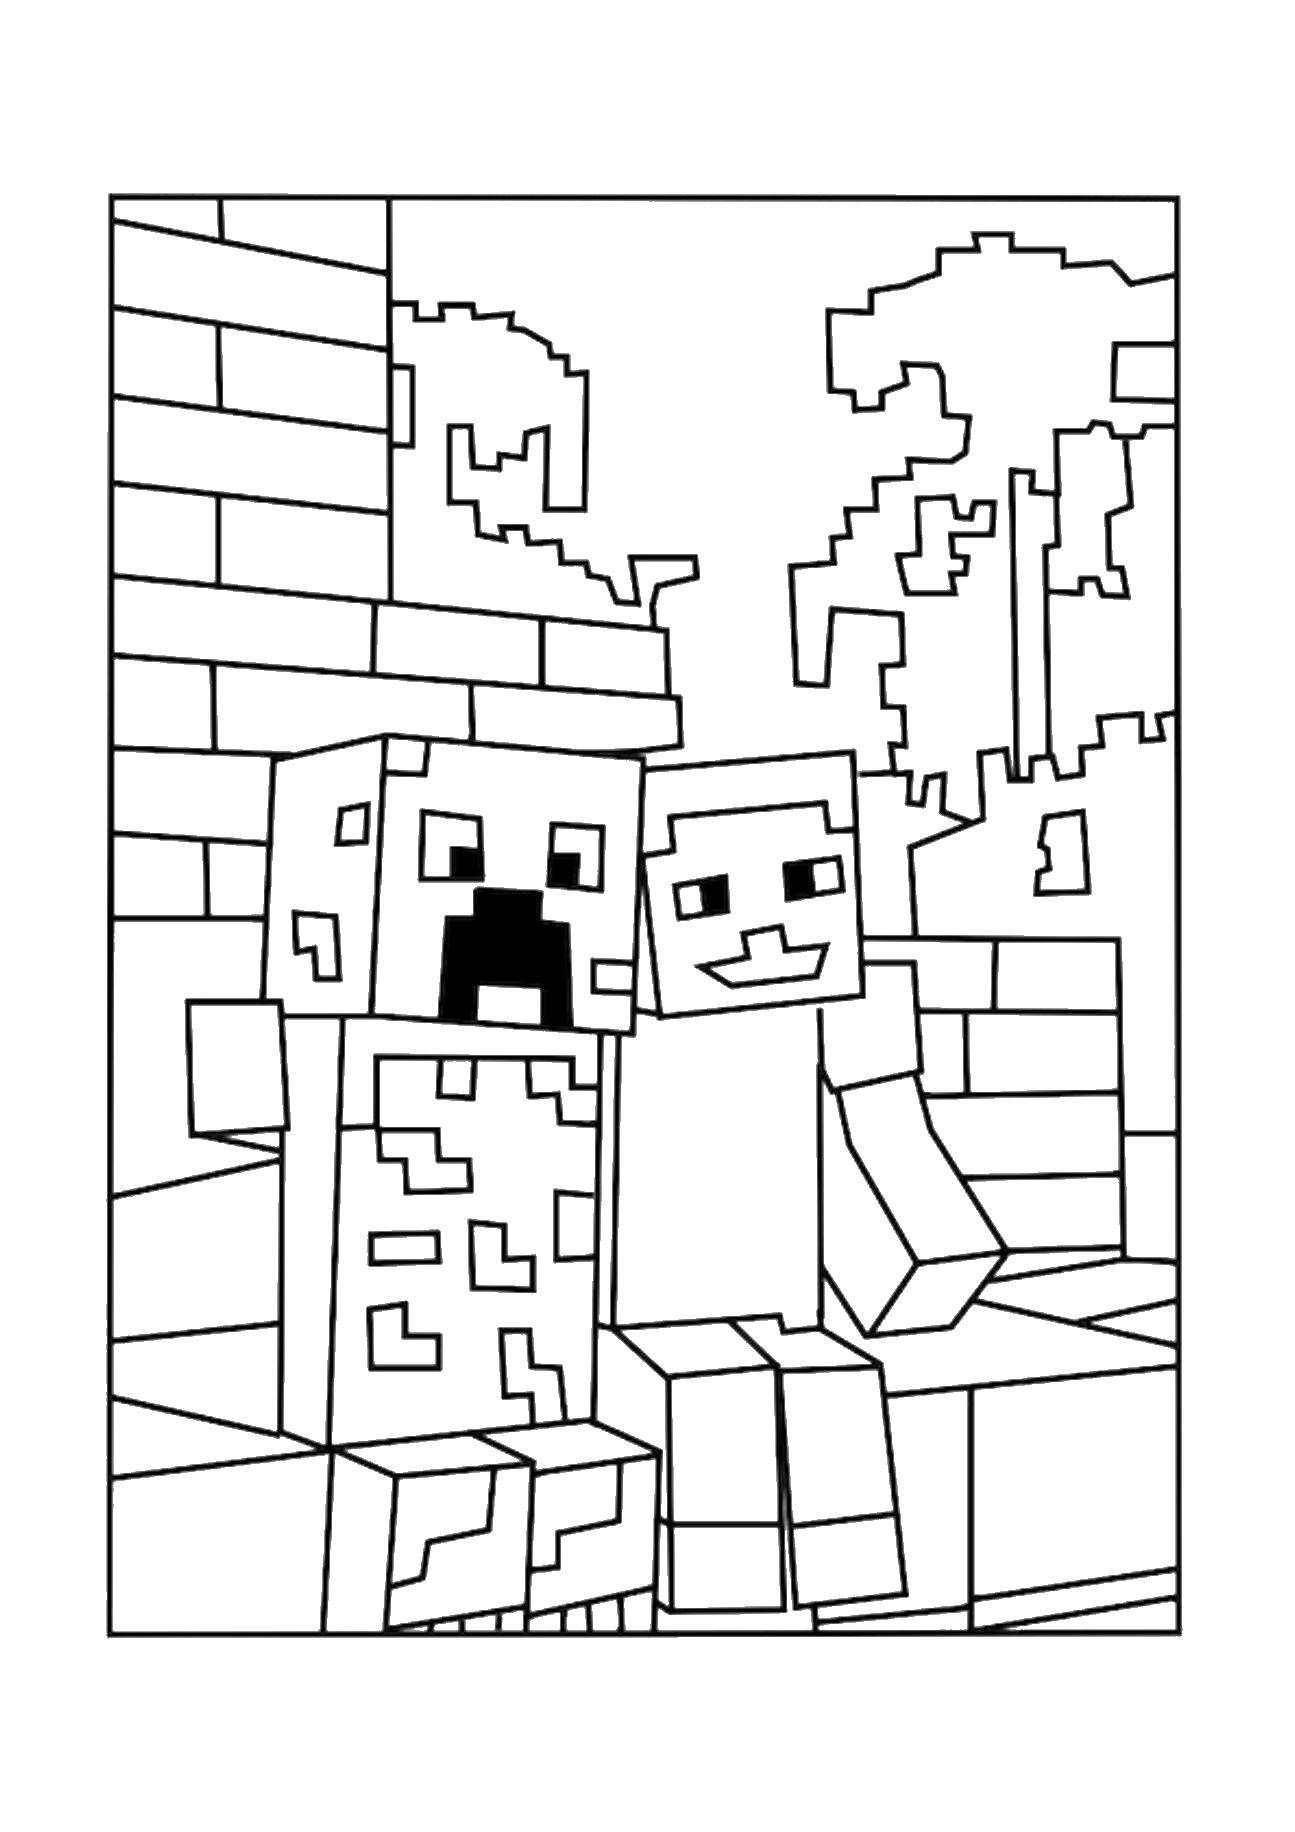 Coloring Characters minecraft. Category The mainkrafta. Tags:  games, minecraft, characters, friends.